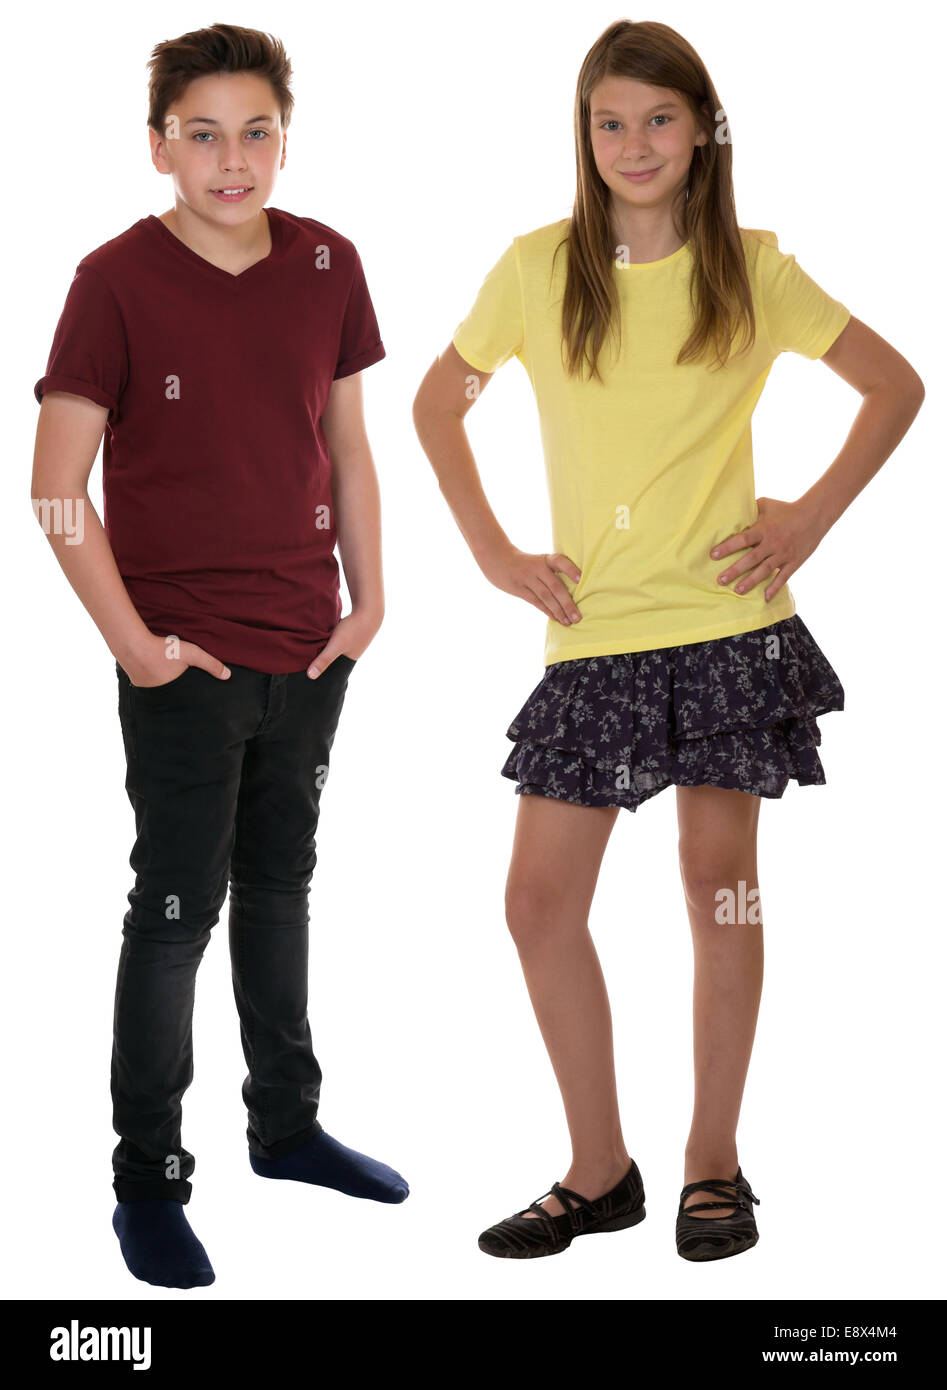 Children or young teenagers full body portrait isolated on a white background Stock Photo